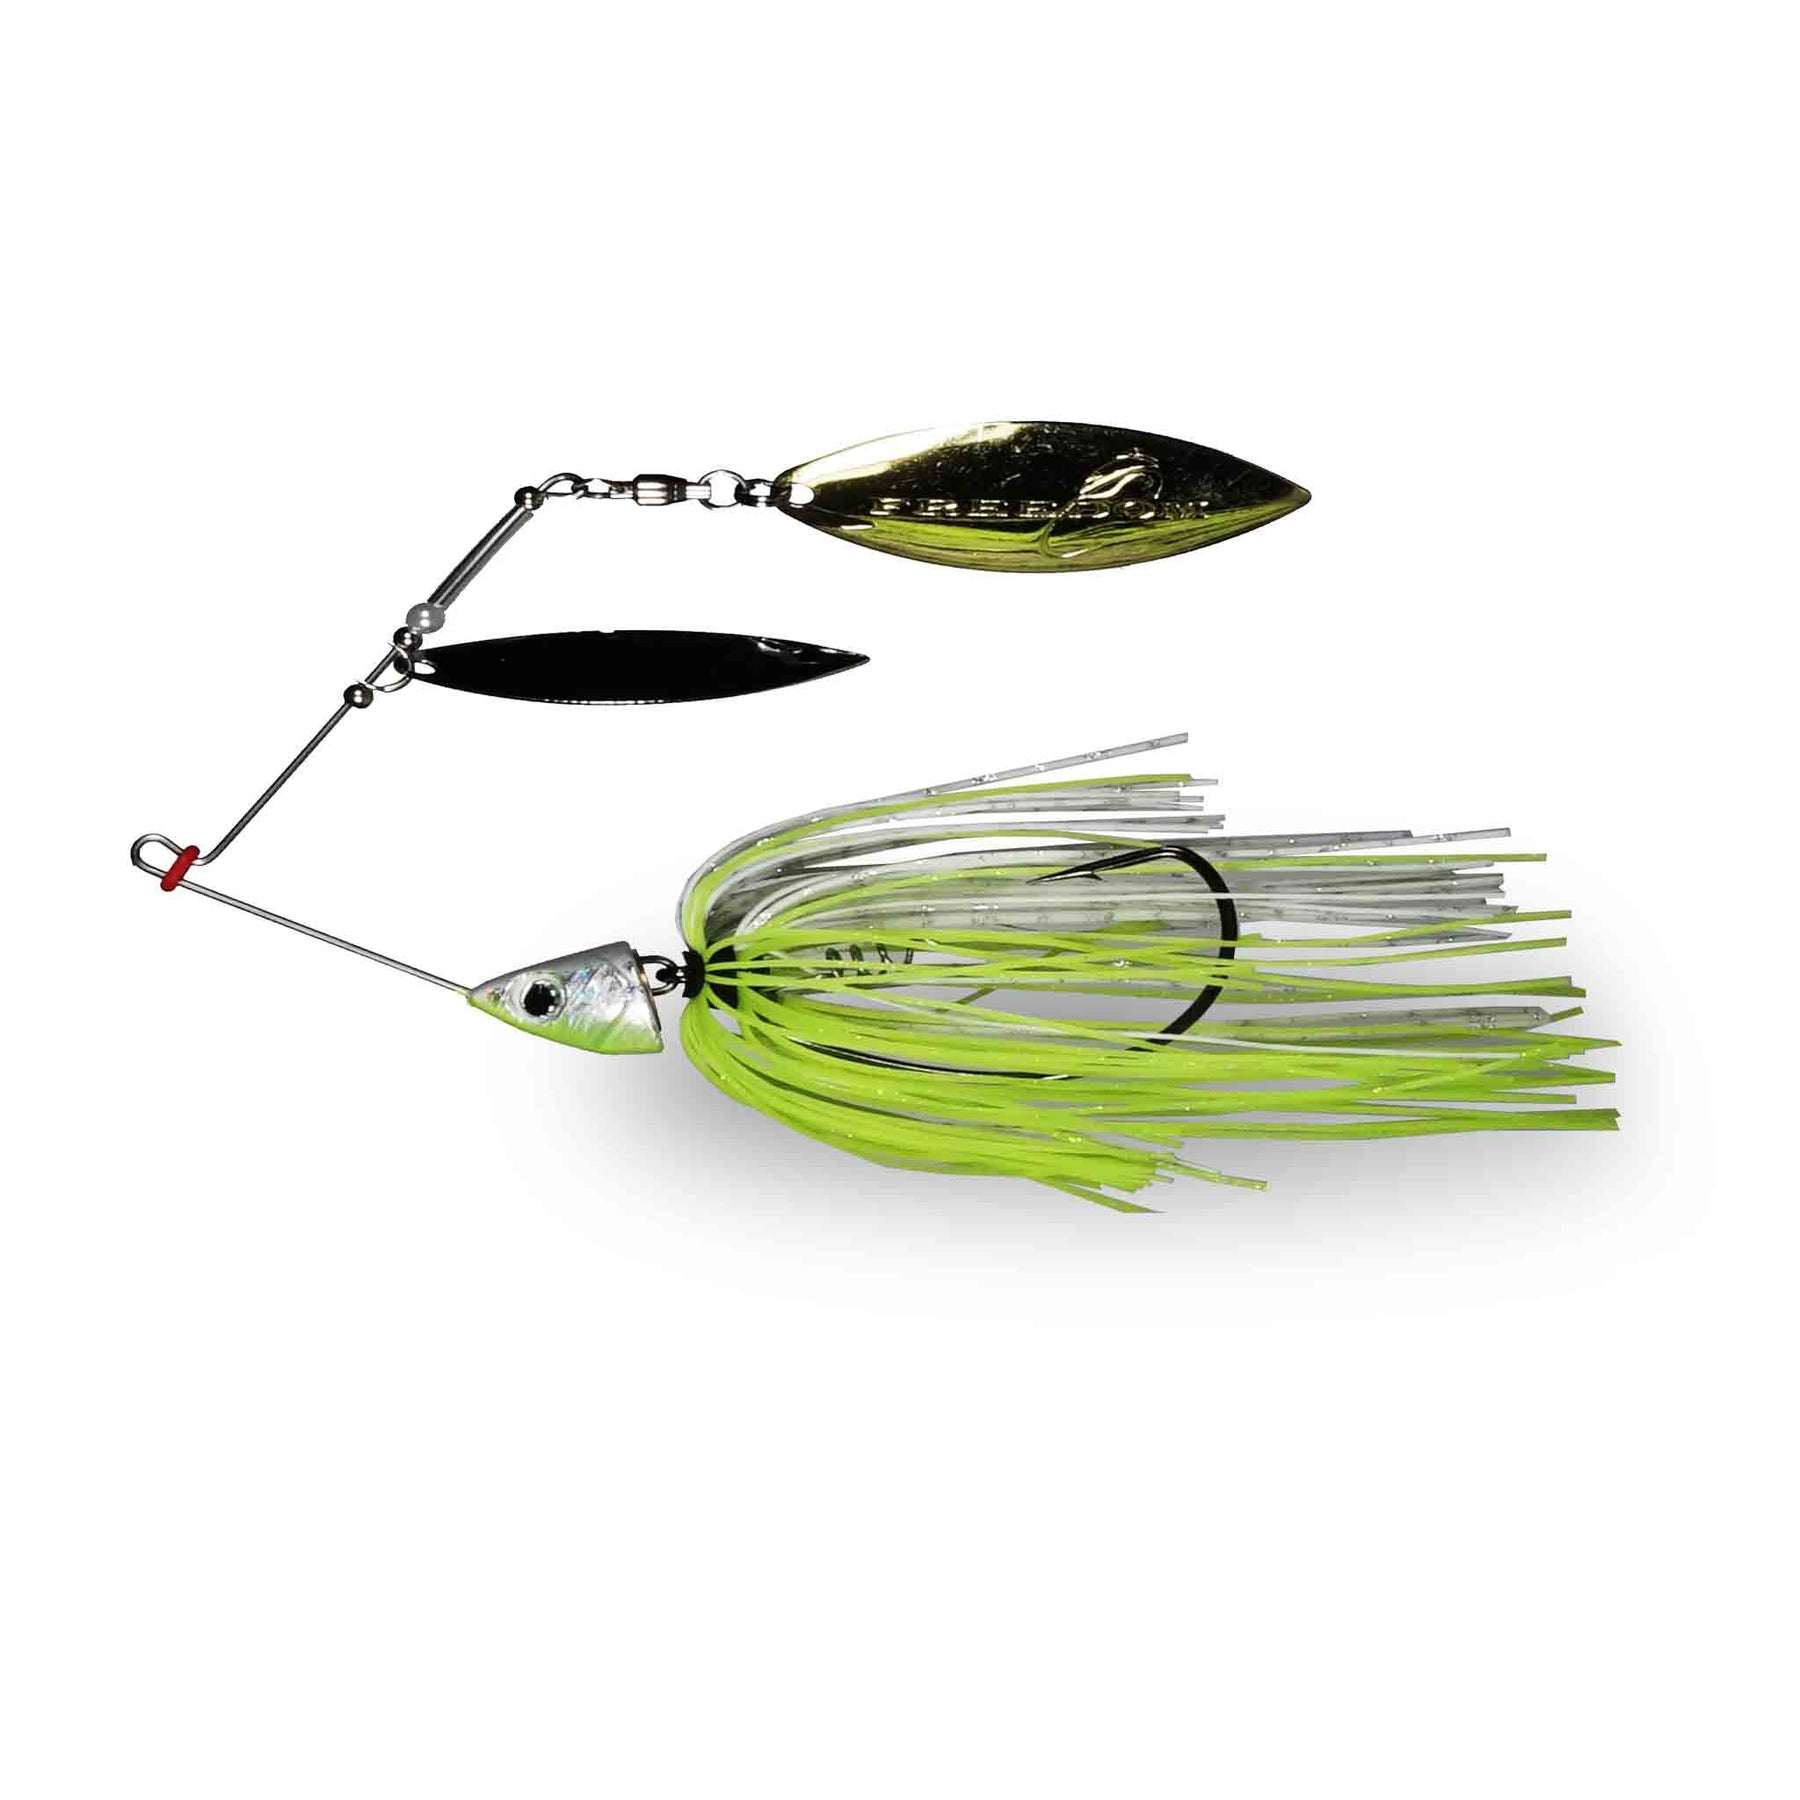 Freedom Tackle Colorado Willow Spinnerbait 1/2oz White / Chatreuse Spinnerbaits